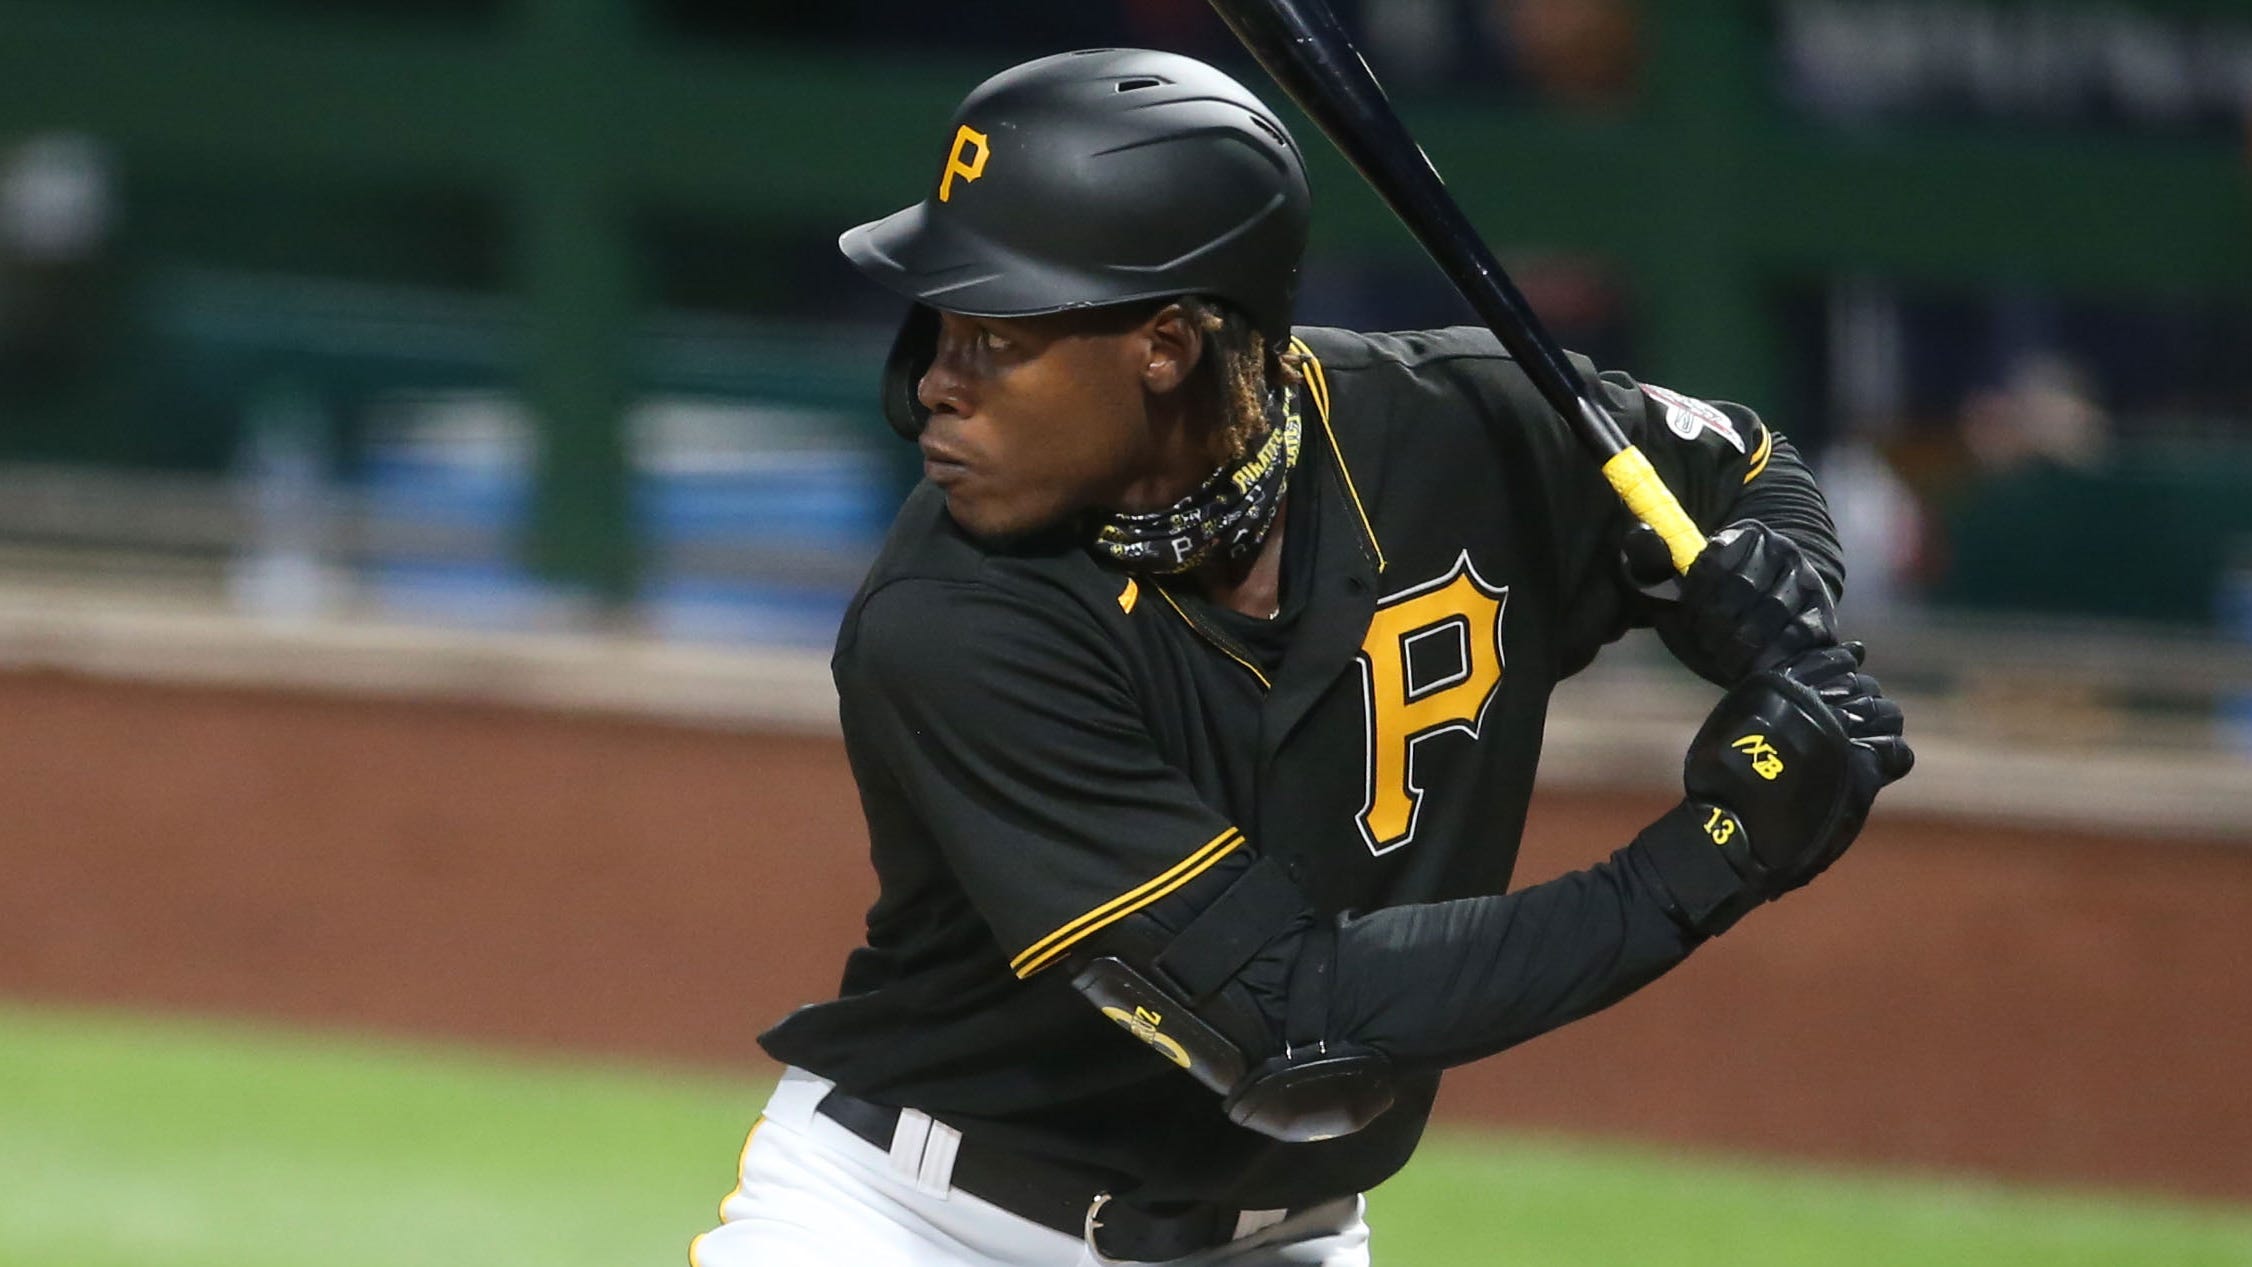 Pirates' Oneil Cruz under influence in DR crash that killed 3 reports